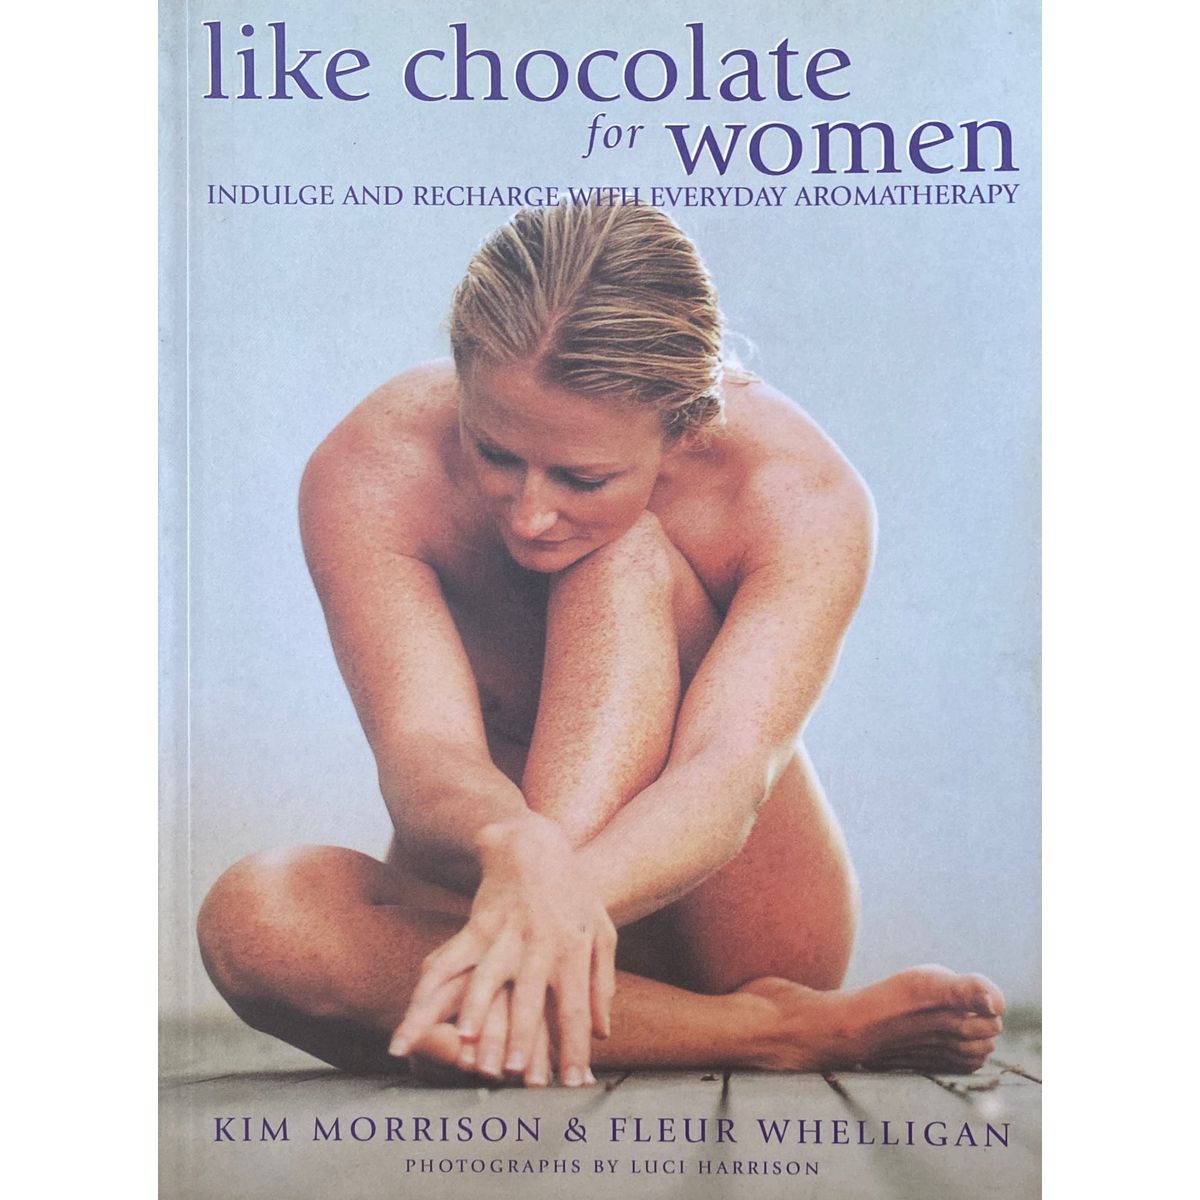 ISBN: 9781919930107 / 1919930108 - Like Chocolate for Women: Indulge and Recharge with Everyday Aromatherapy by Kim Morrison & Fleur Whelligan [2003]